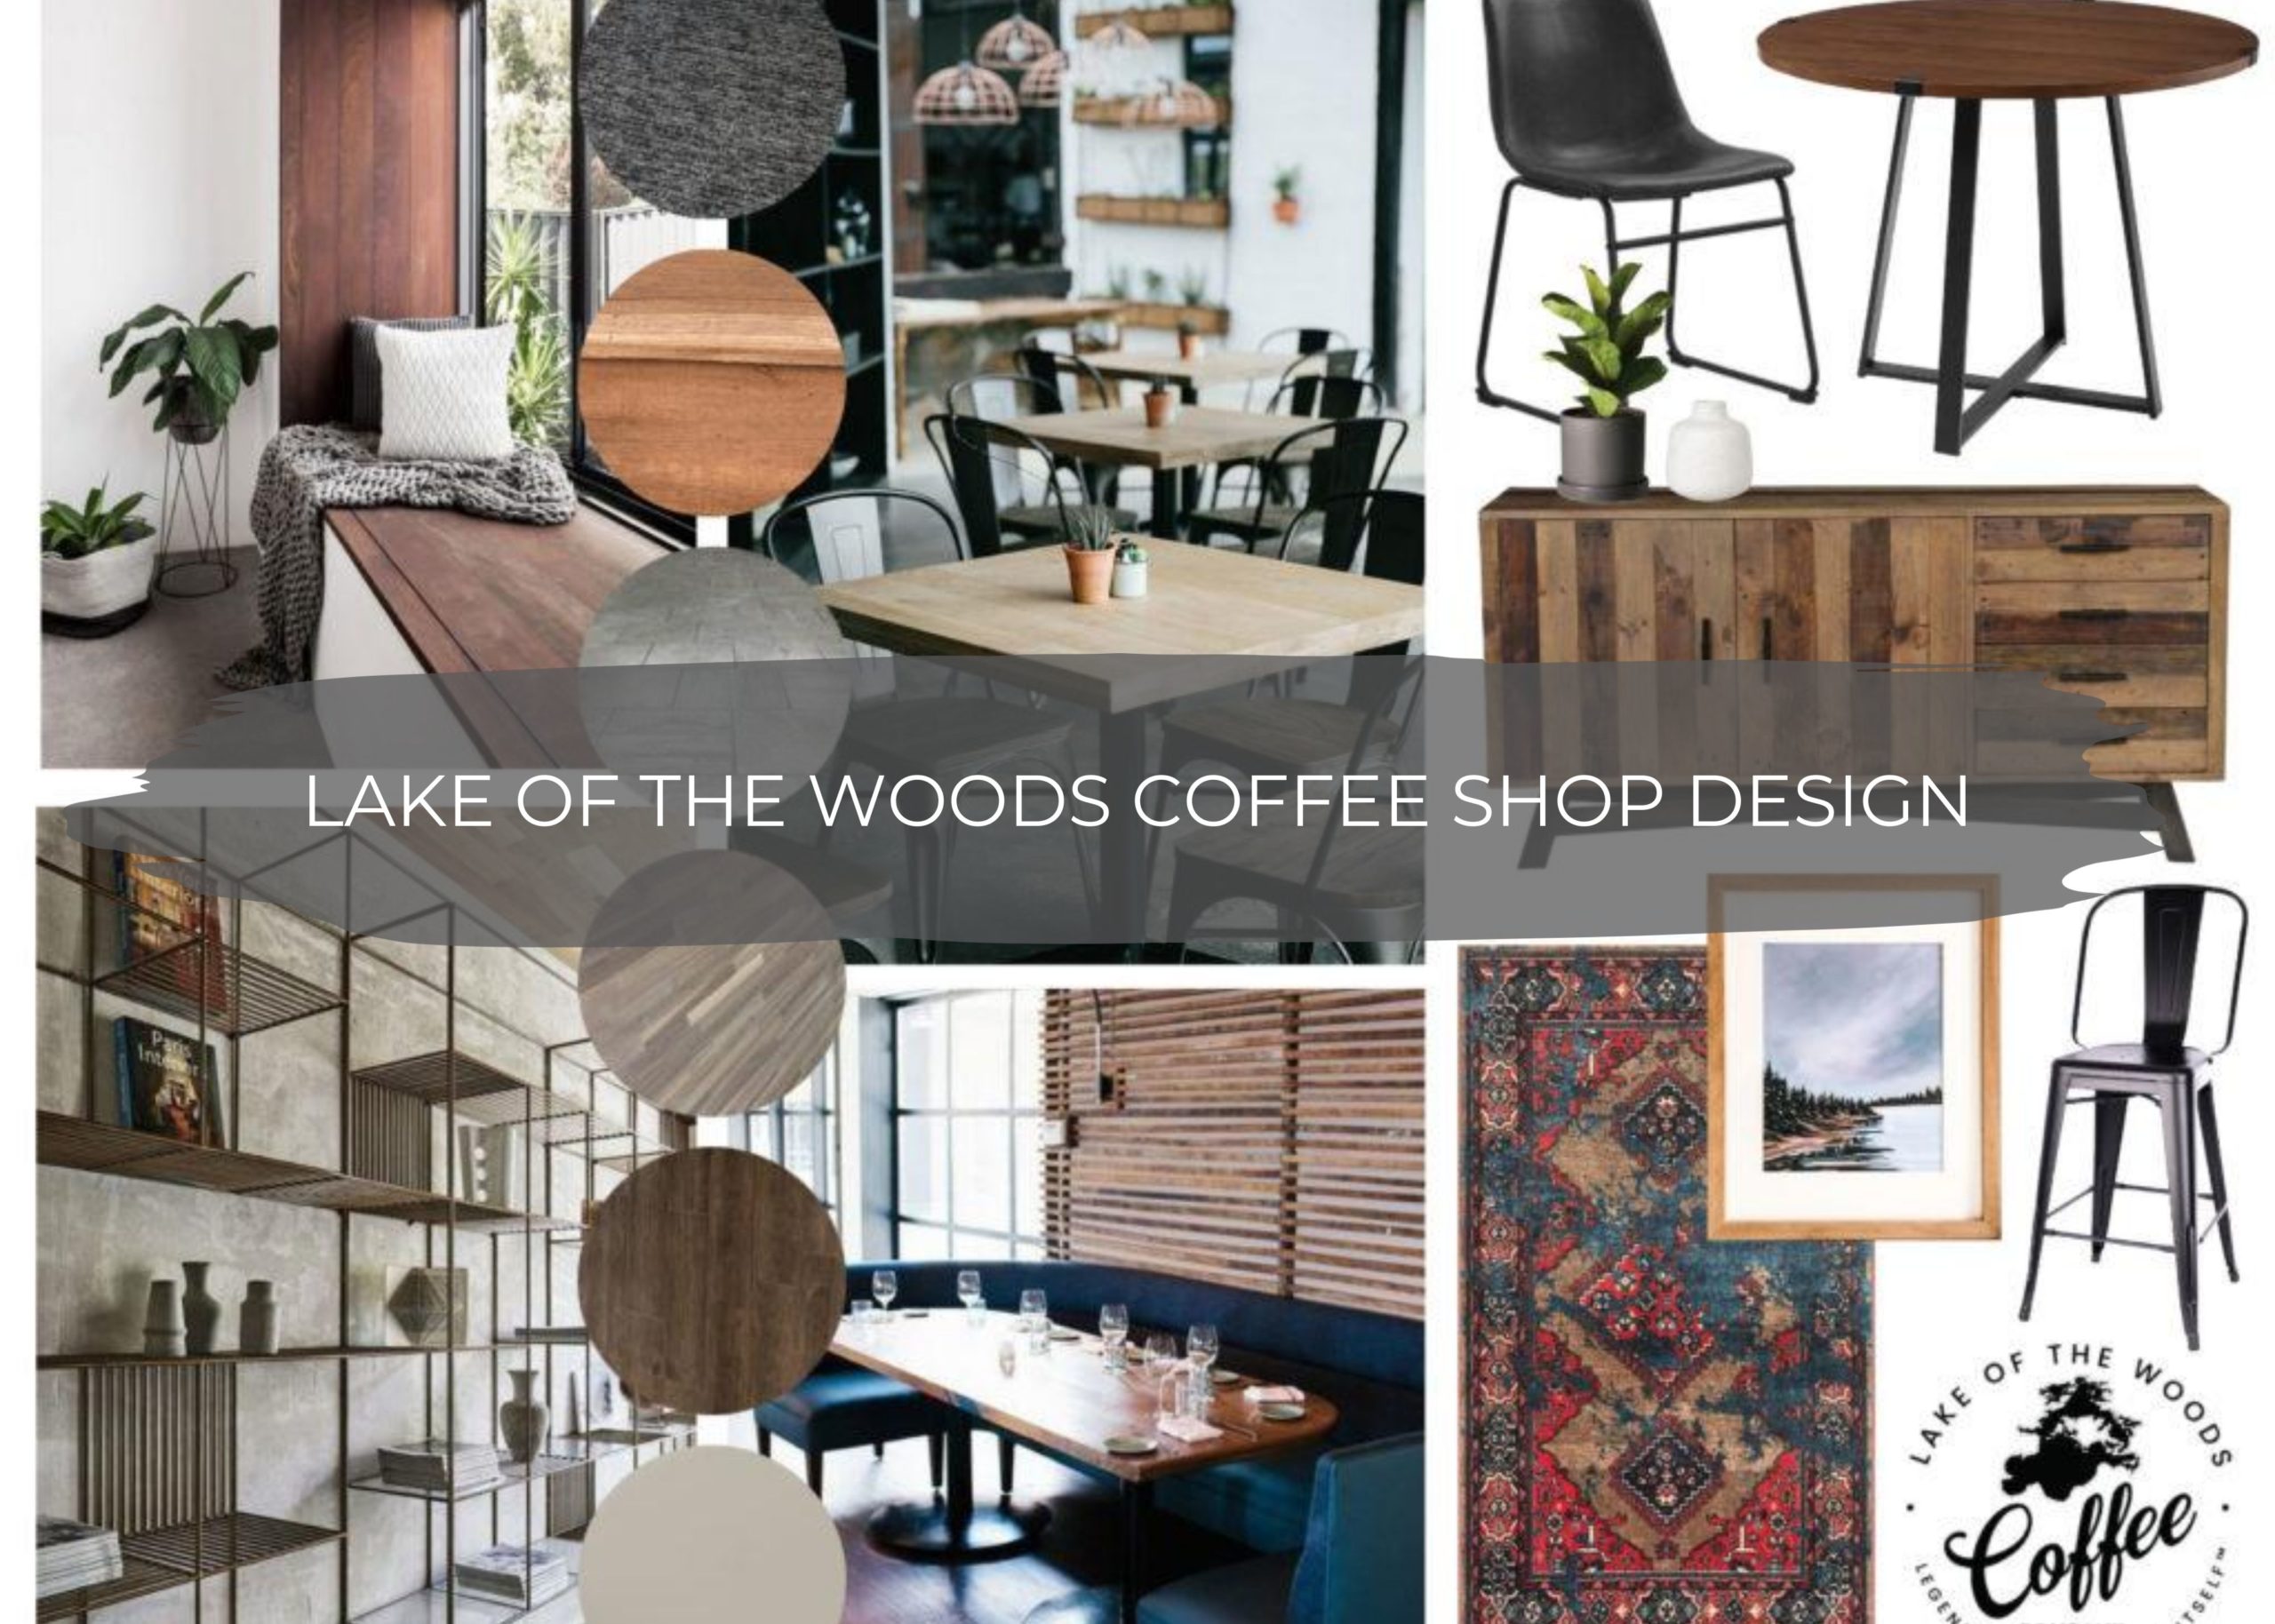 Lake of the Woods Coffee Shop Design 1